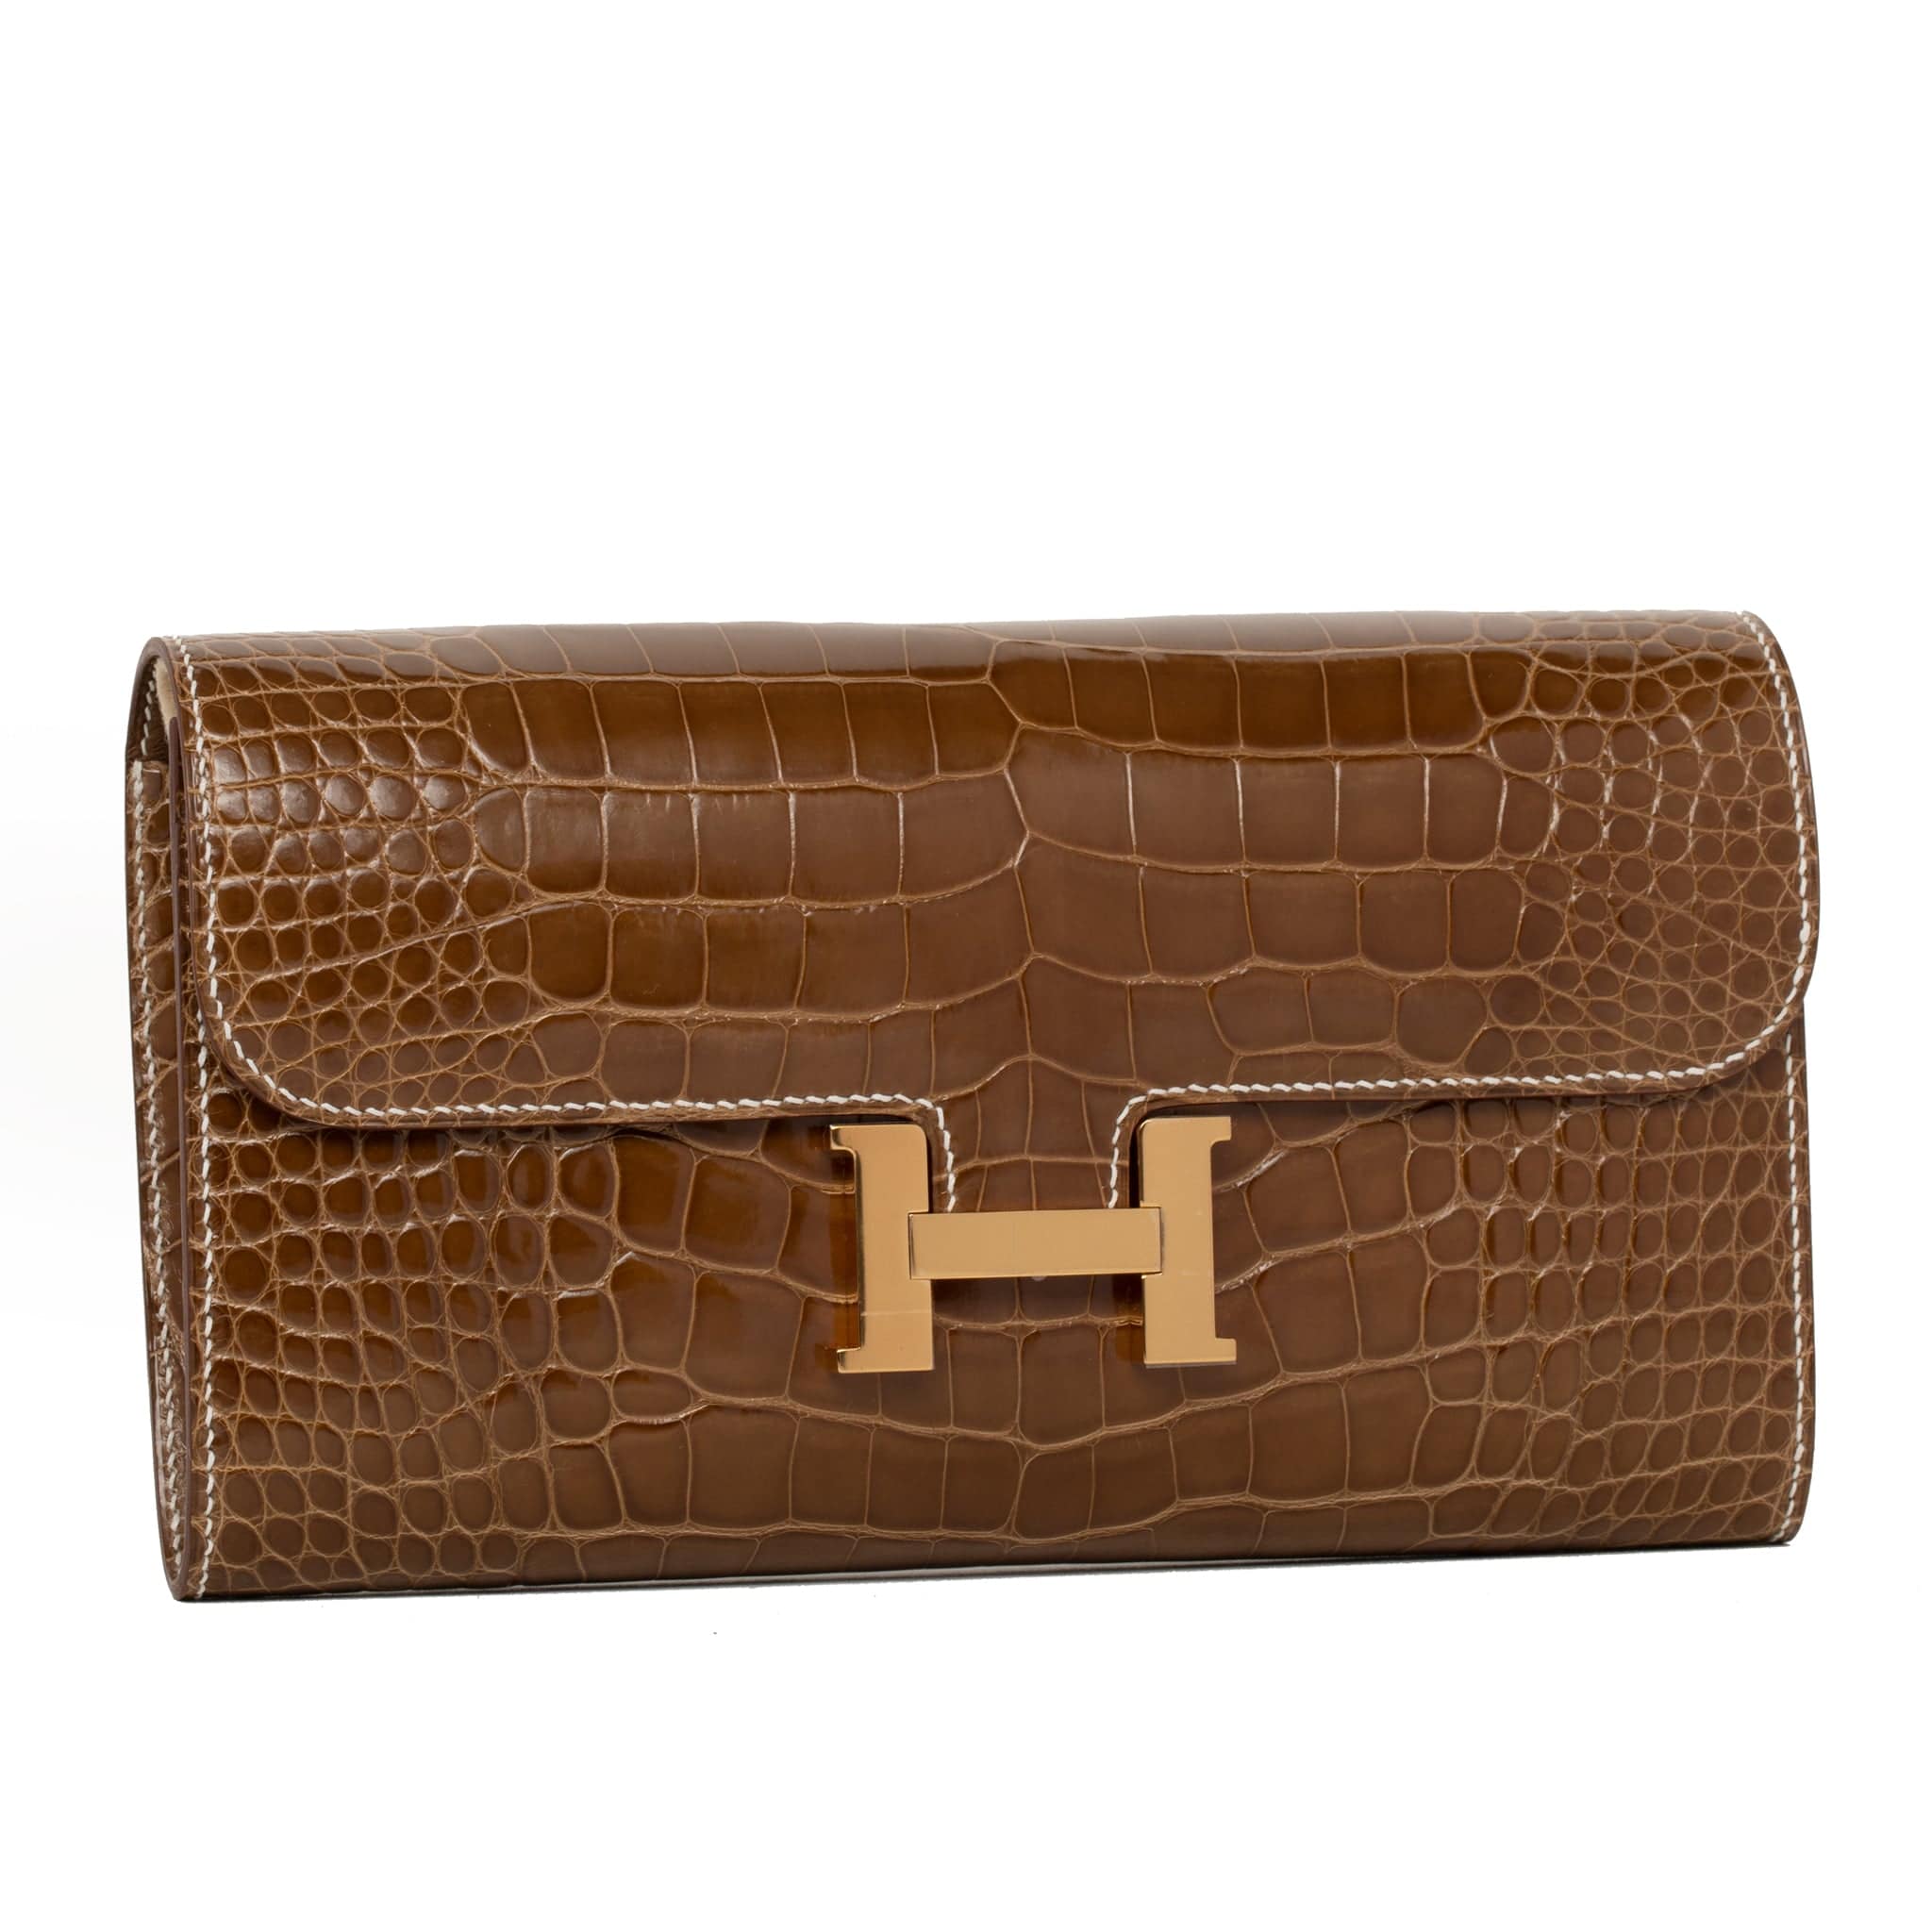 HERMES CONSTANCE WALLET FICELLE ALLIGATOR GOLD HARDWARE - On Repeat